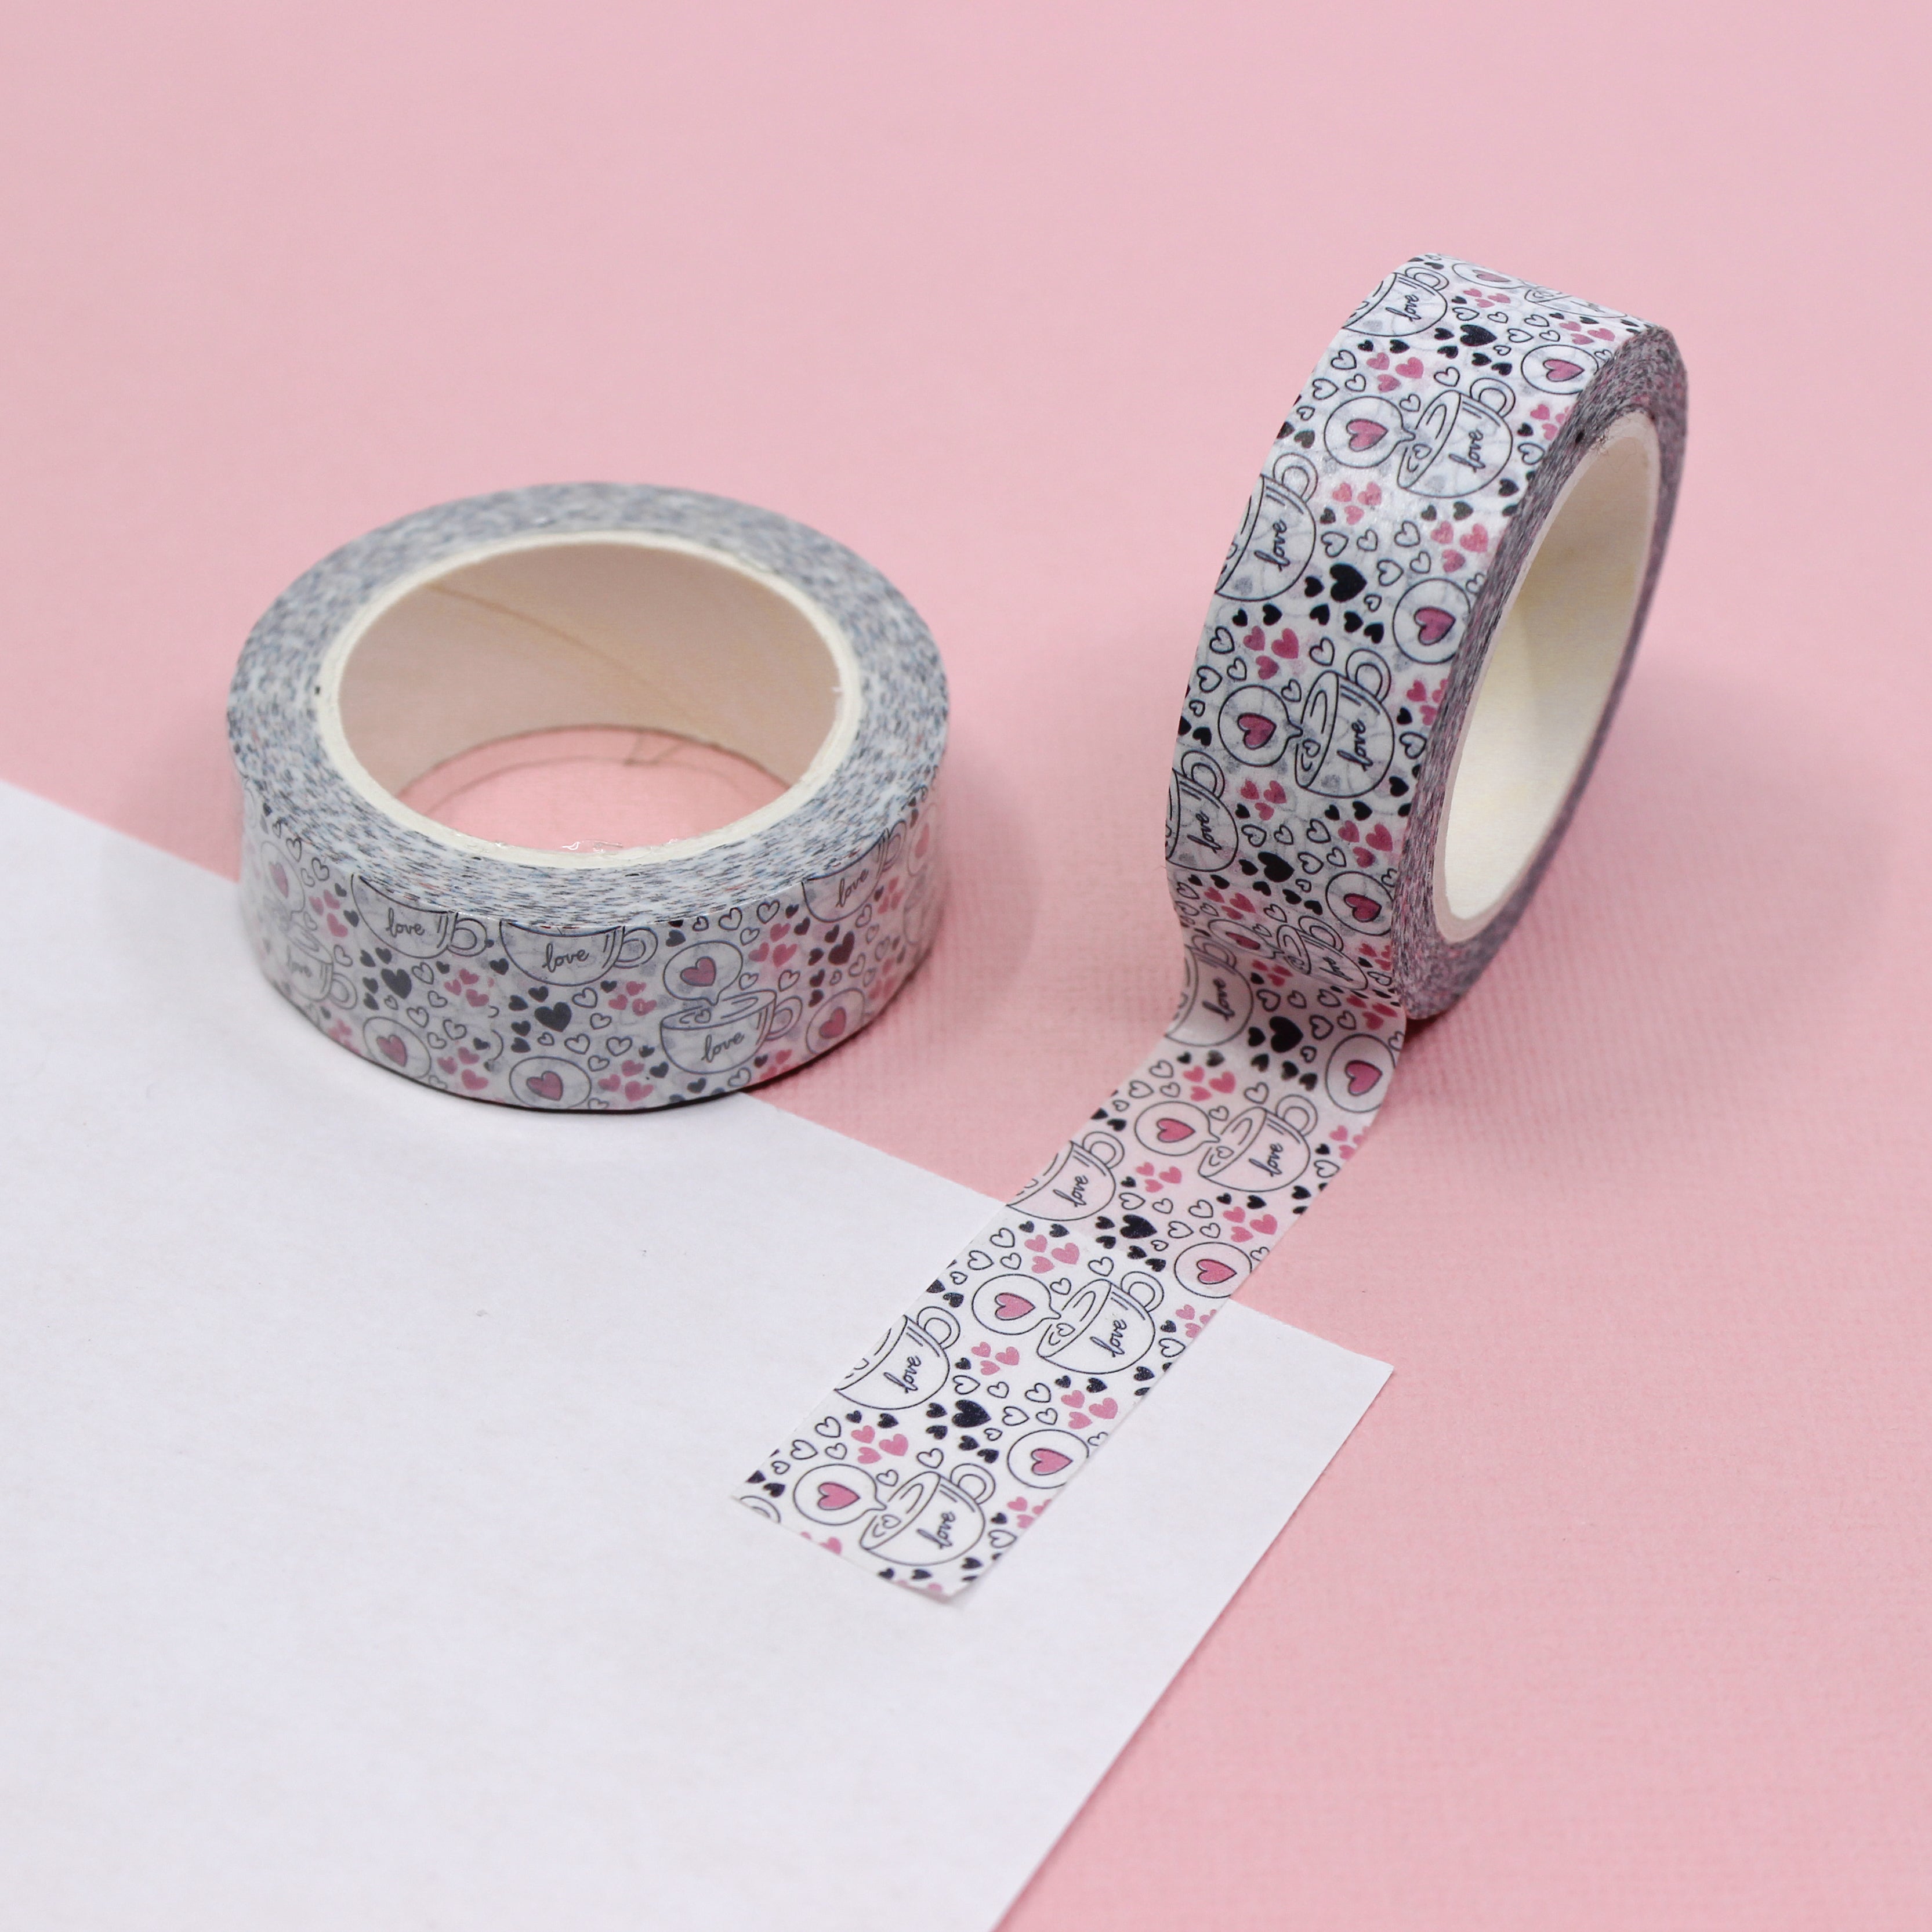 This tape is an expression of love with delicate heart and cup motifs that are perfect for adding a cute, romantic touch to your greeting cards, scrapbooks, or gift wrapping. This tape is sold at BBB Supplies Craft Shop and is perfect for the Valentine's Day Holiday.